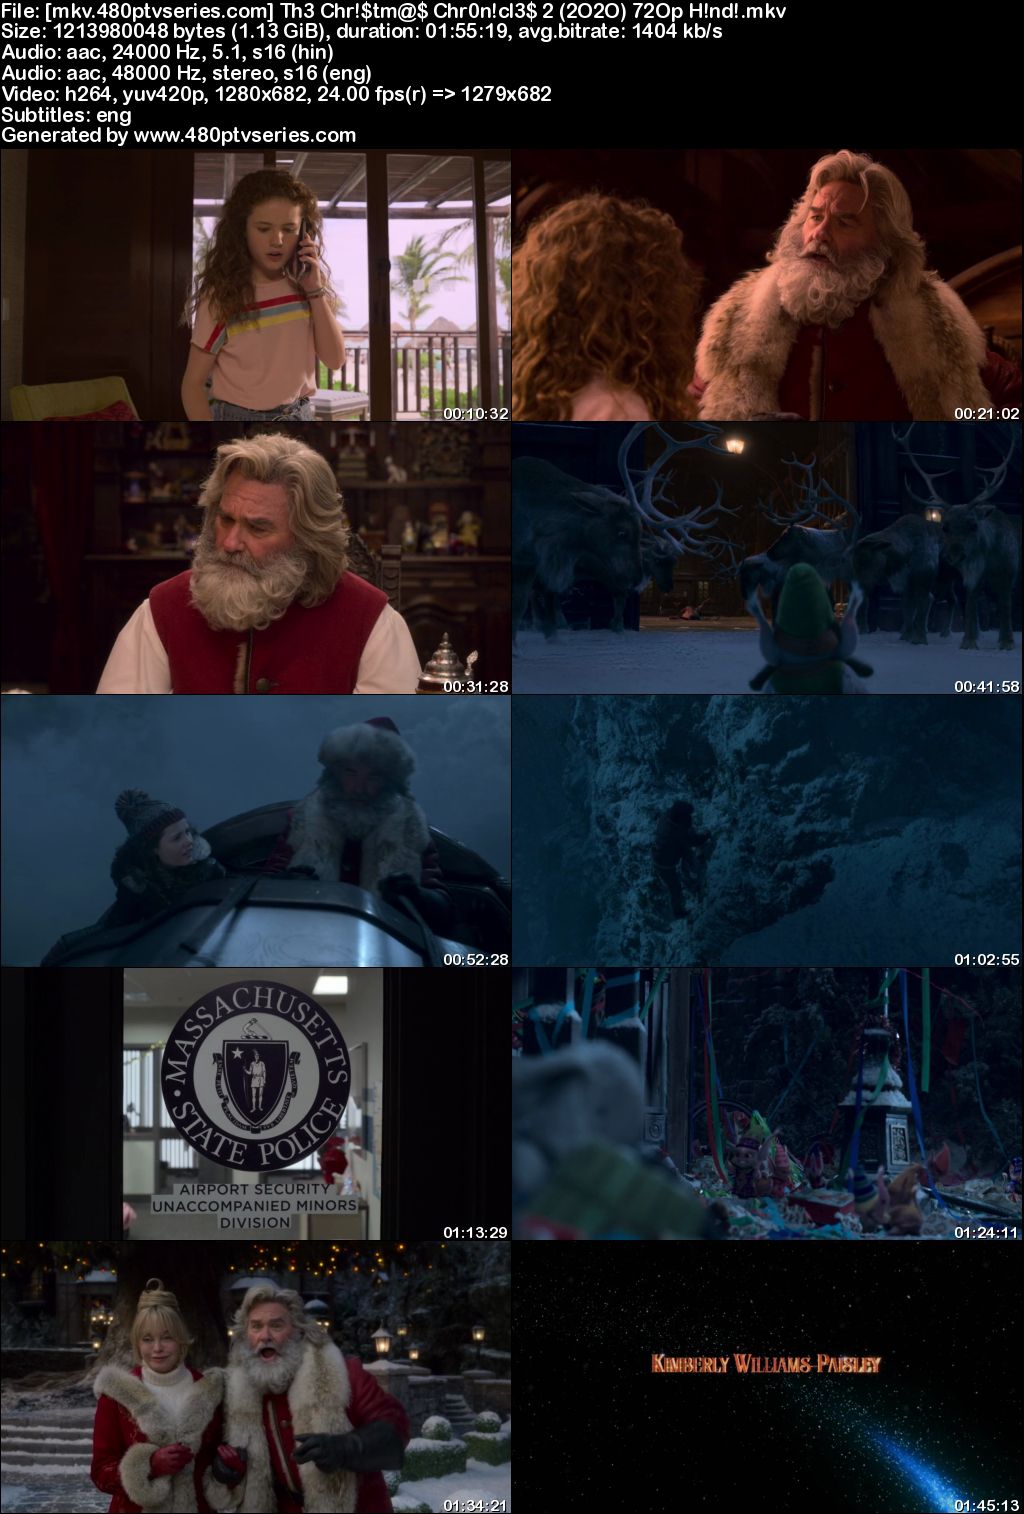 Watch Online Free The Christmas Chronicles 2 (2020) Full Hindi Dual Audio Movie Download 480p 720p Web-DL